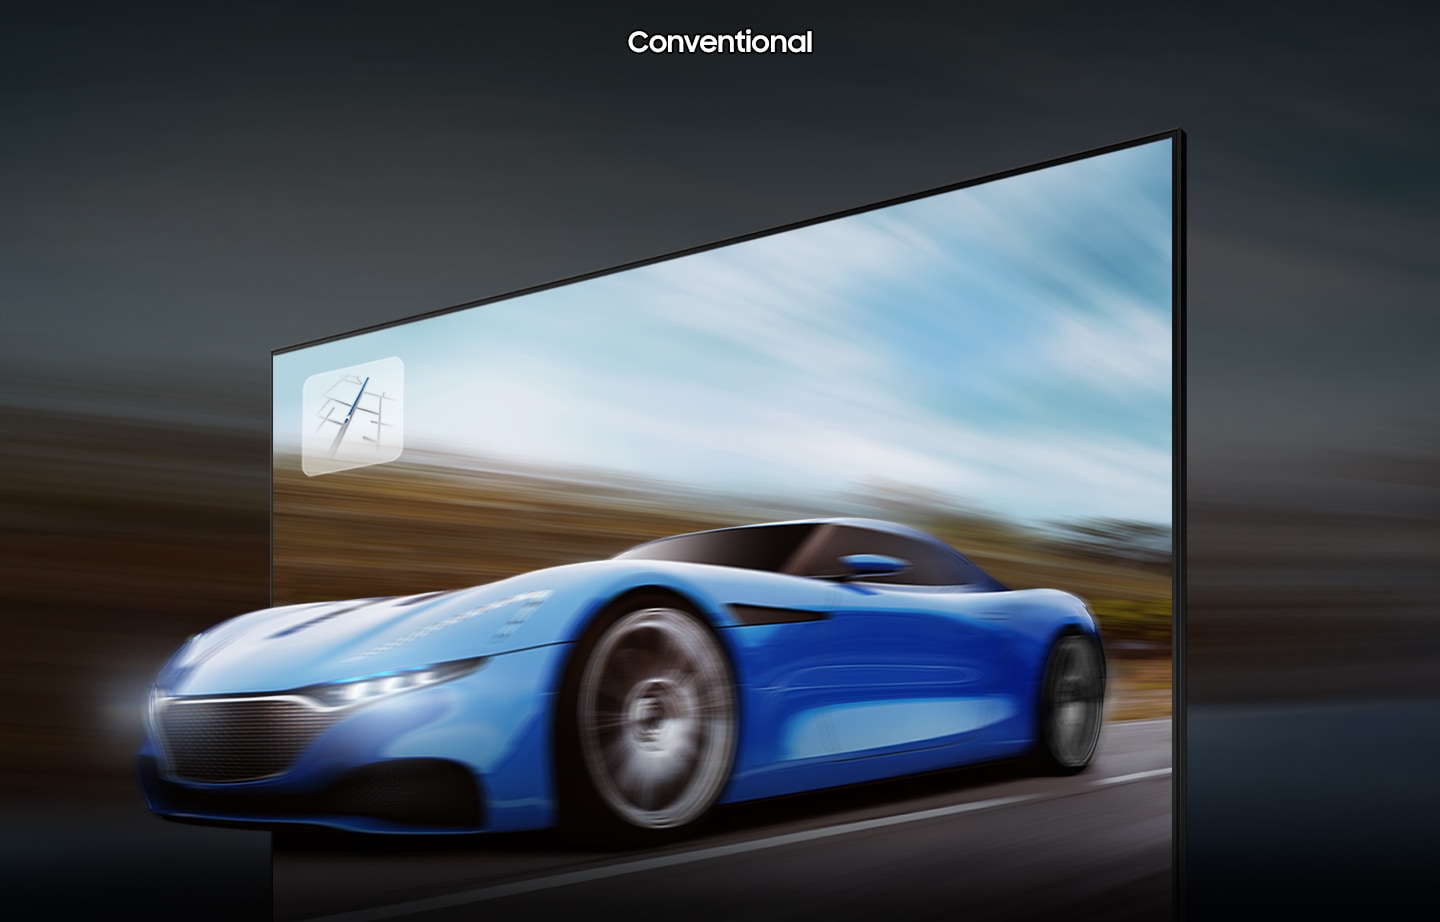 A racing car in conventional TV looks blurry and less clear compared to QLED TV with motion xcelerator turbo+ technology.